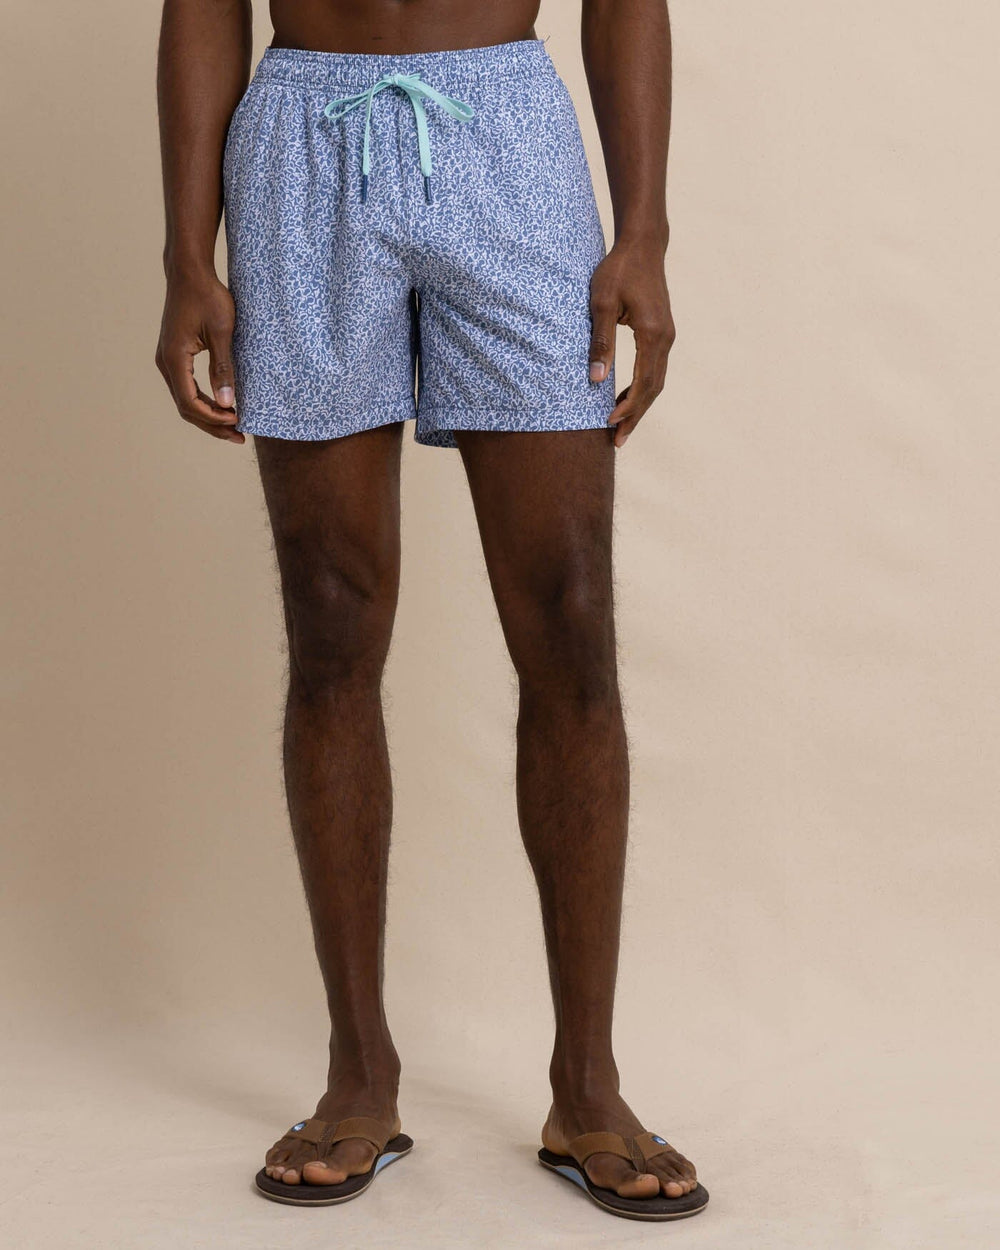 The front view of the Southern Tide That Floral Feeling Swim Trunk by Southern Tide - Coronet Blue